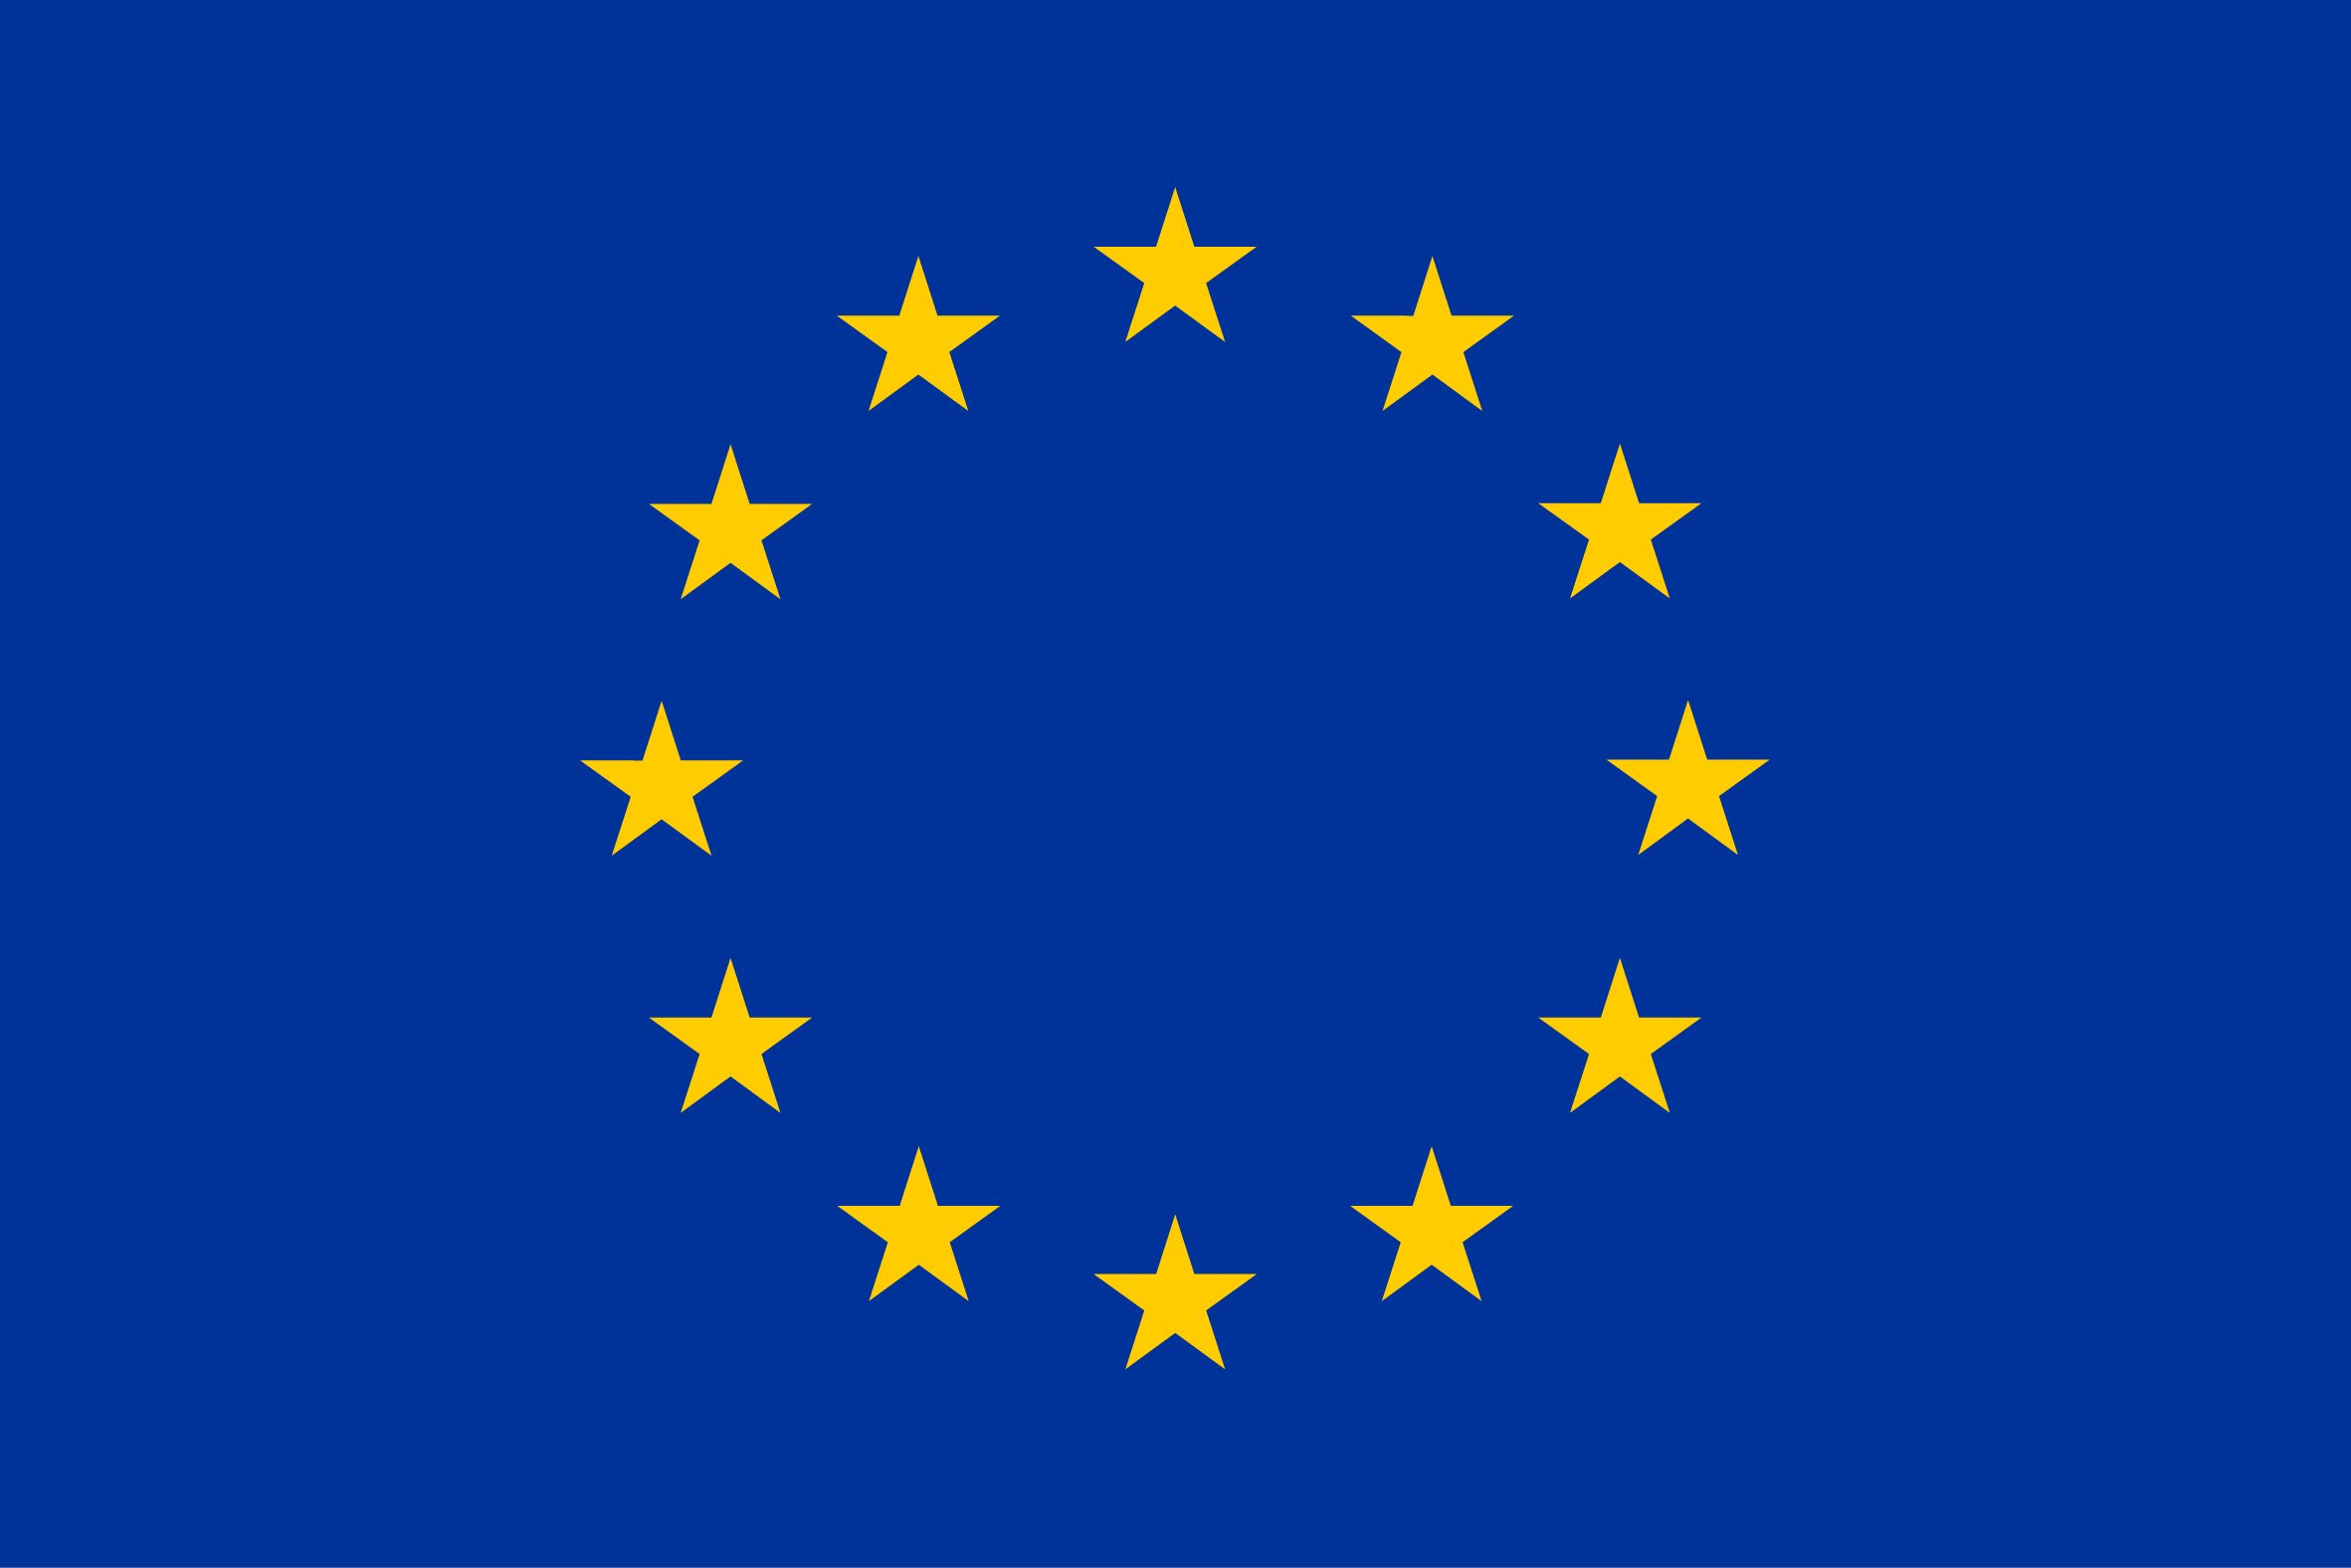 Statement by the Heads of Mission of the EU and of Member States in Kosovo